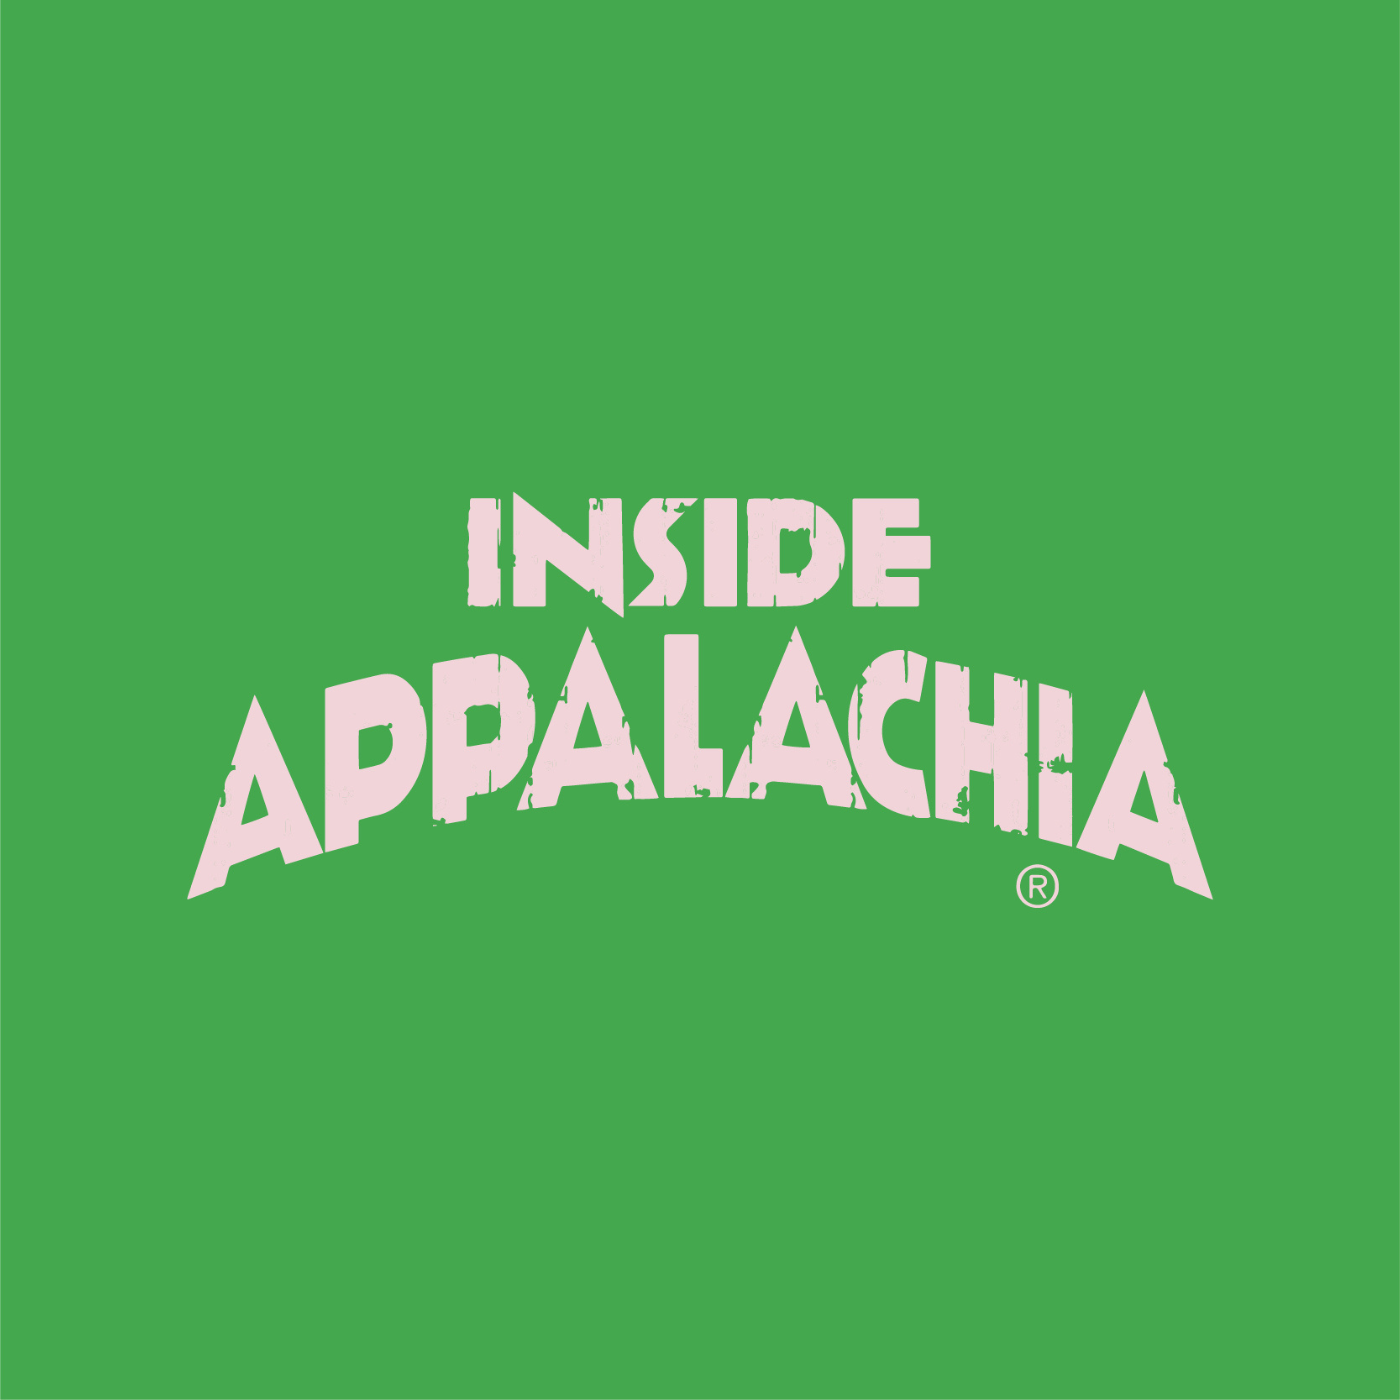 The Rock Band Wednesday, Quilting and The Moonshine Messiah, Inside Appalachia